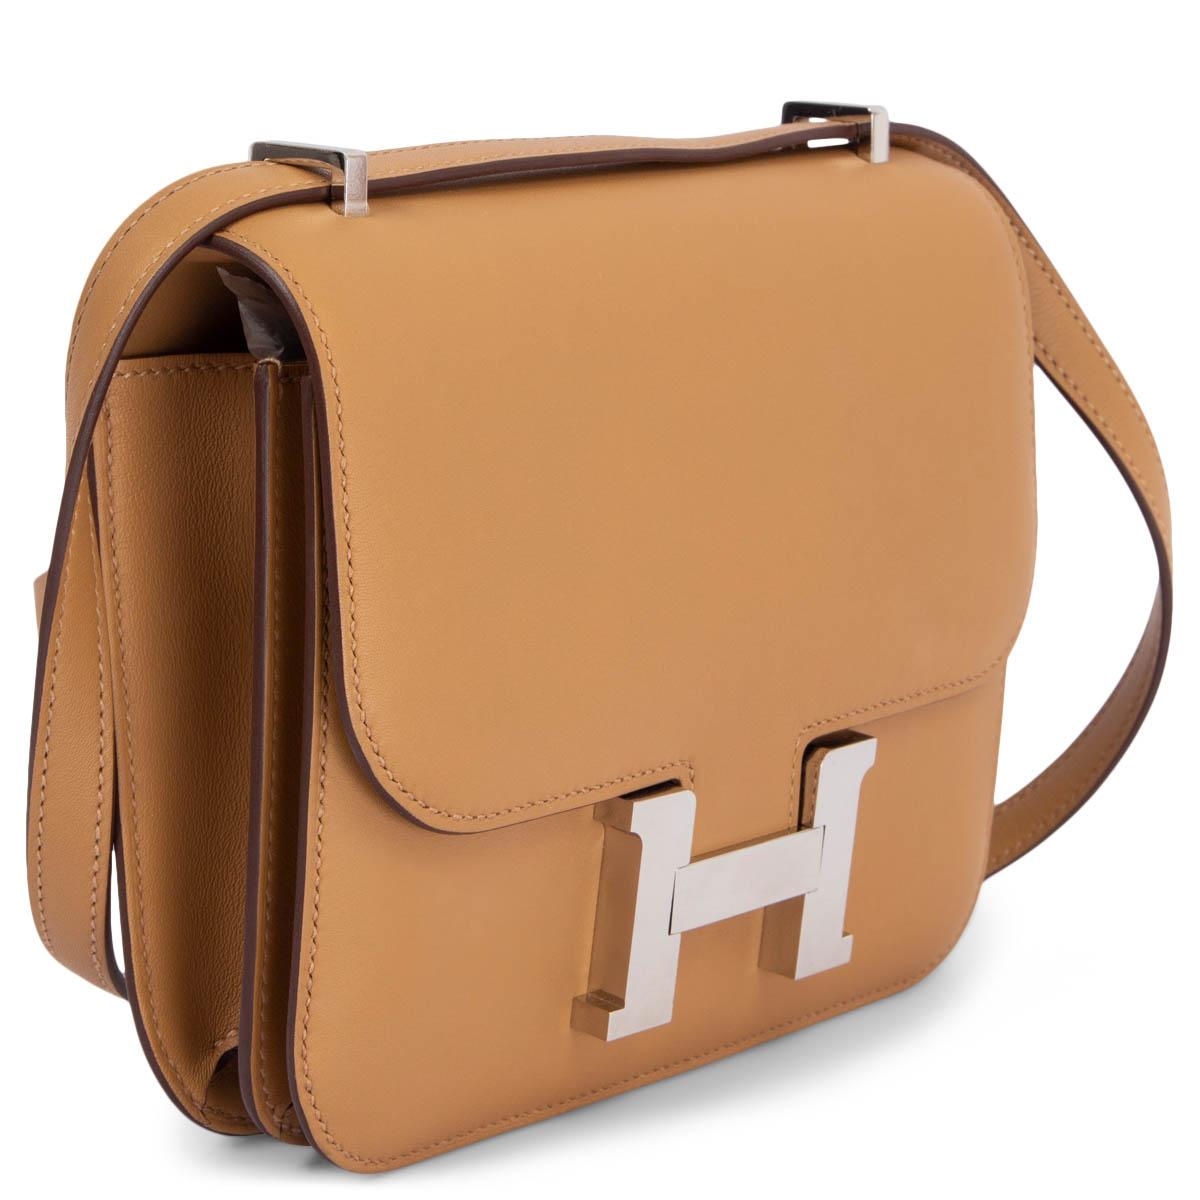 100% authentic Hermès Constance 18 mini shoulder bag in Biscuit Swift leather. Palladium H-Buckle closure. Lined in Veau Swift leather. Inside is divided into two compartments with an open pocket against the front and back. Has been carried and